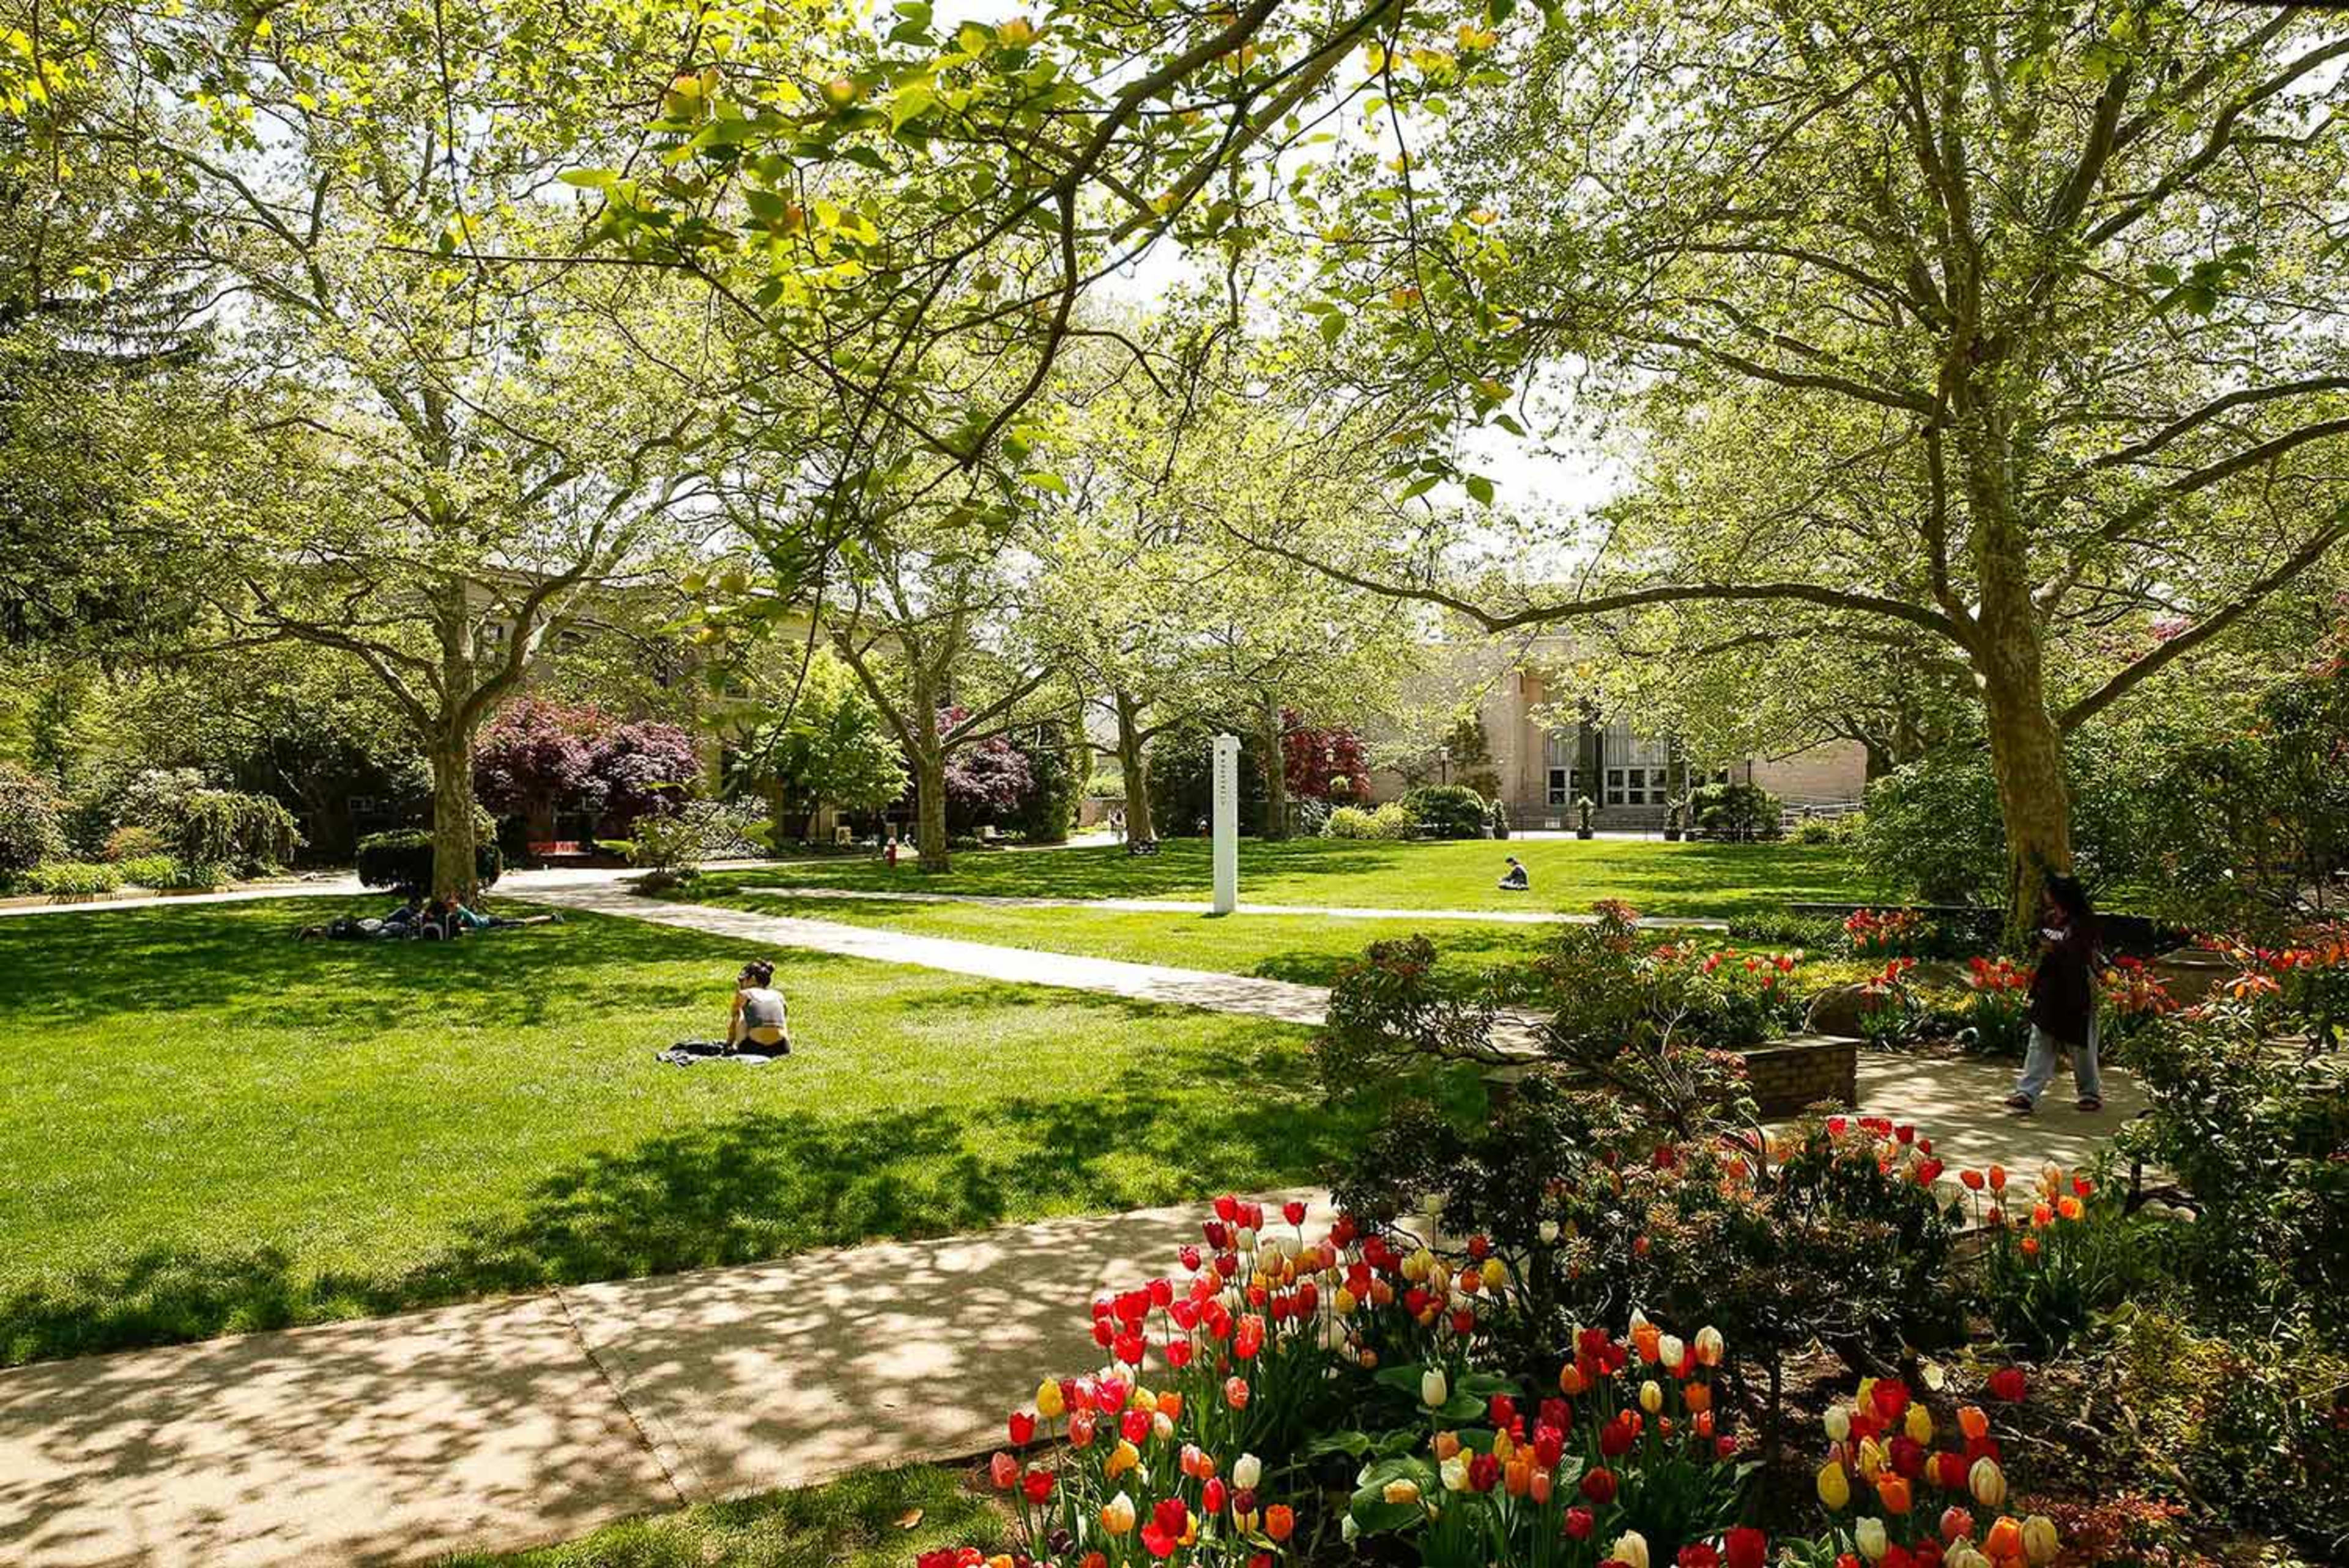 Campus life and city life, have it all at Hofstra